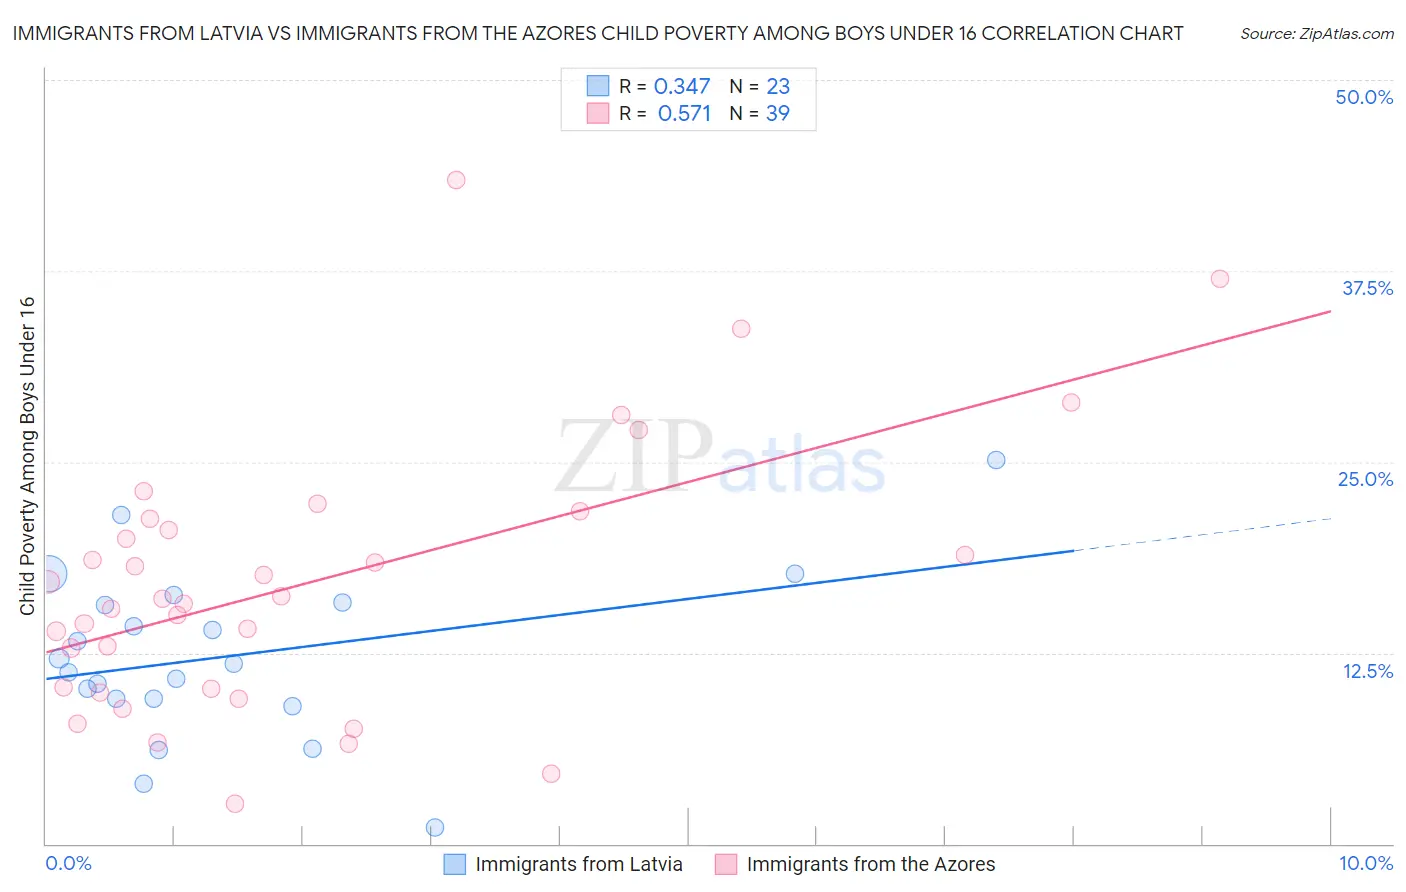 Immigrants from Latvia vs Immigrants from the Azores Child Poverty Among Boys Under 16